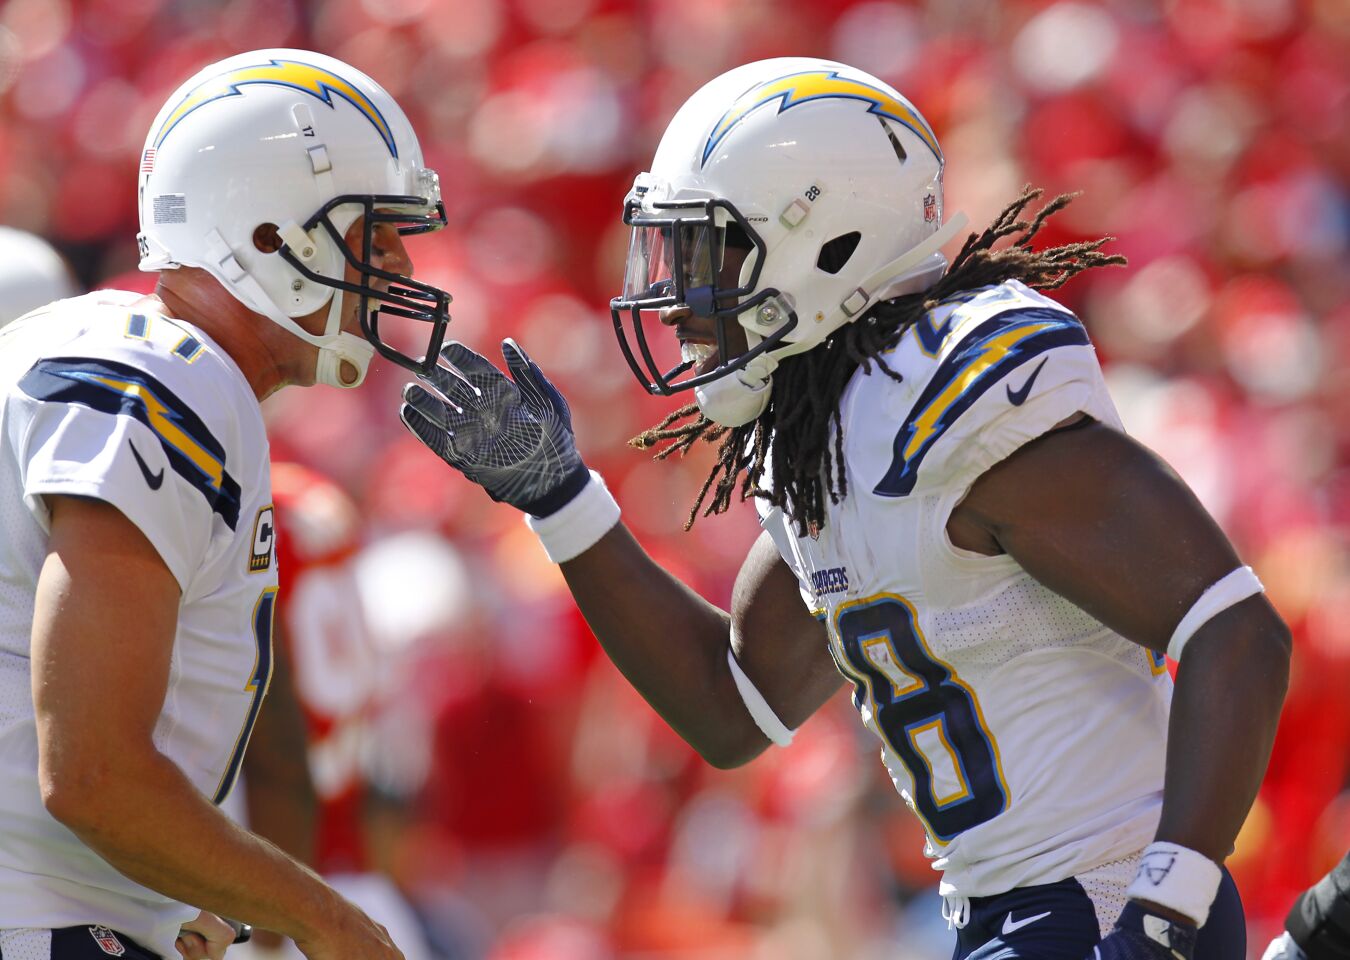 San Diego Chargers Melvin Gordon celebrates a 2nd quarter touchdown with Philip Rivers against the Kansas City Chiefs on Sept. 11, 2016.